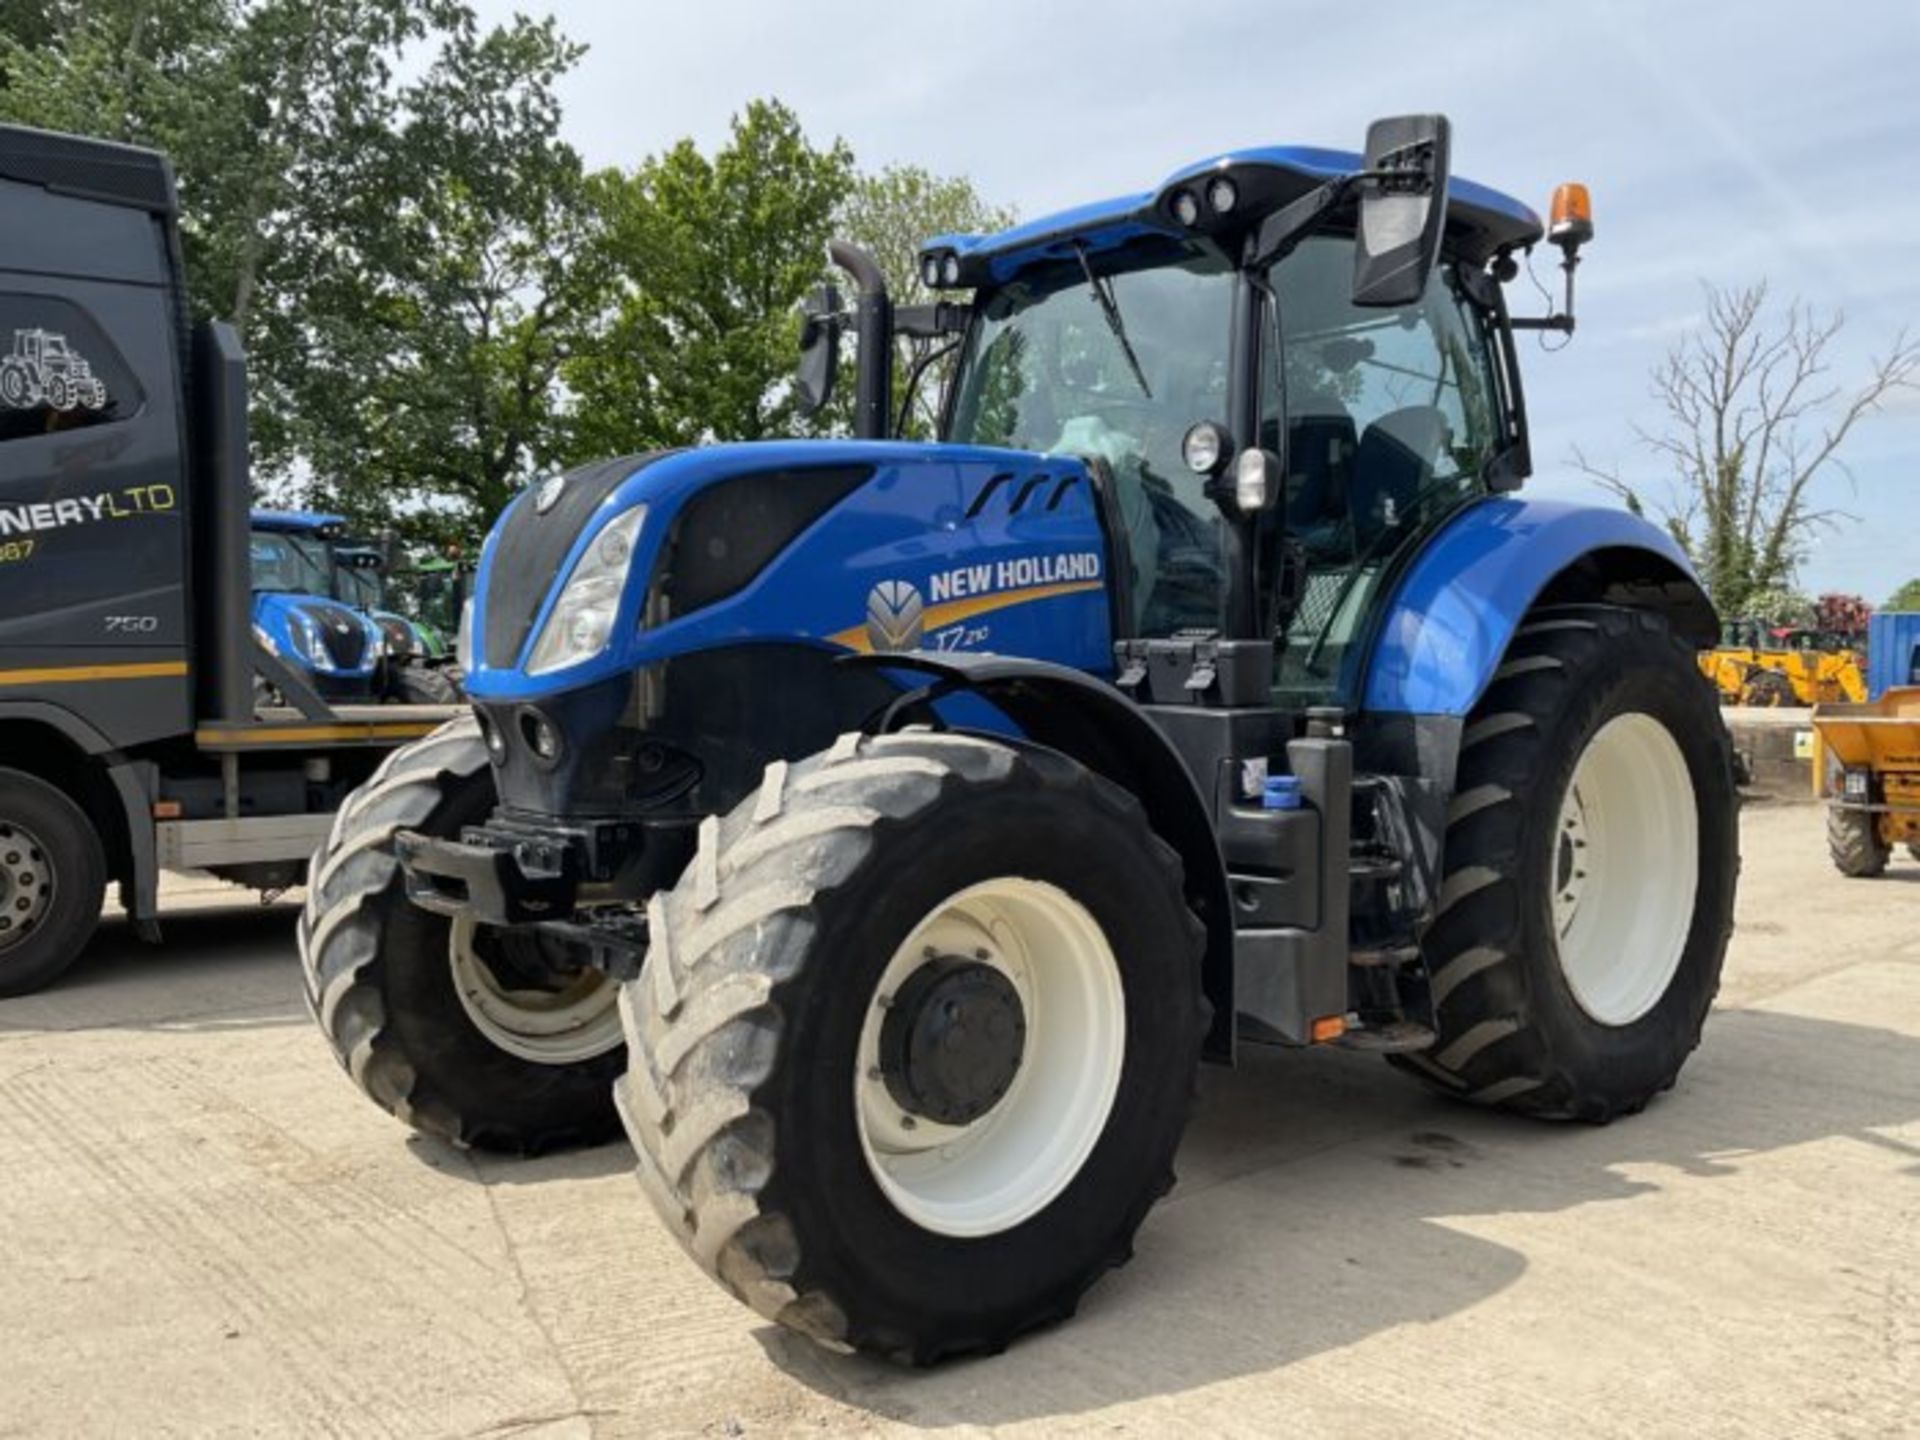 NEW HOLLAND T7.210 4033 HOURS. 2020 – 20 REG. - Image 11 of 11